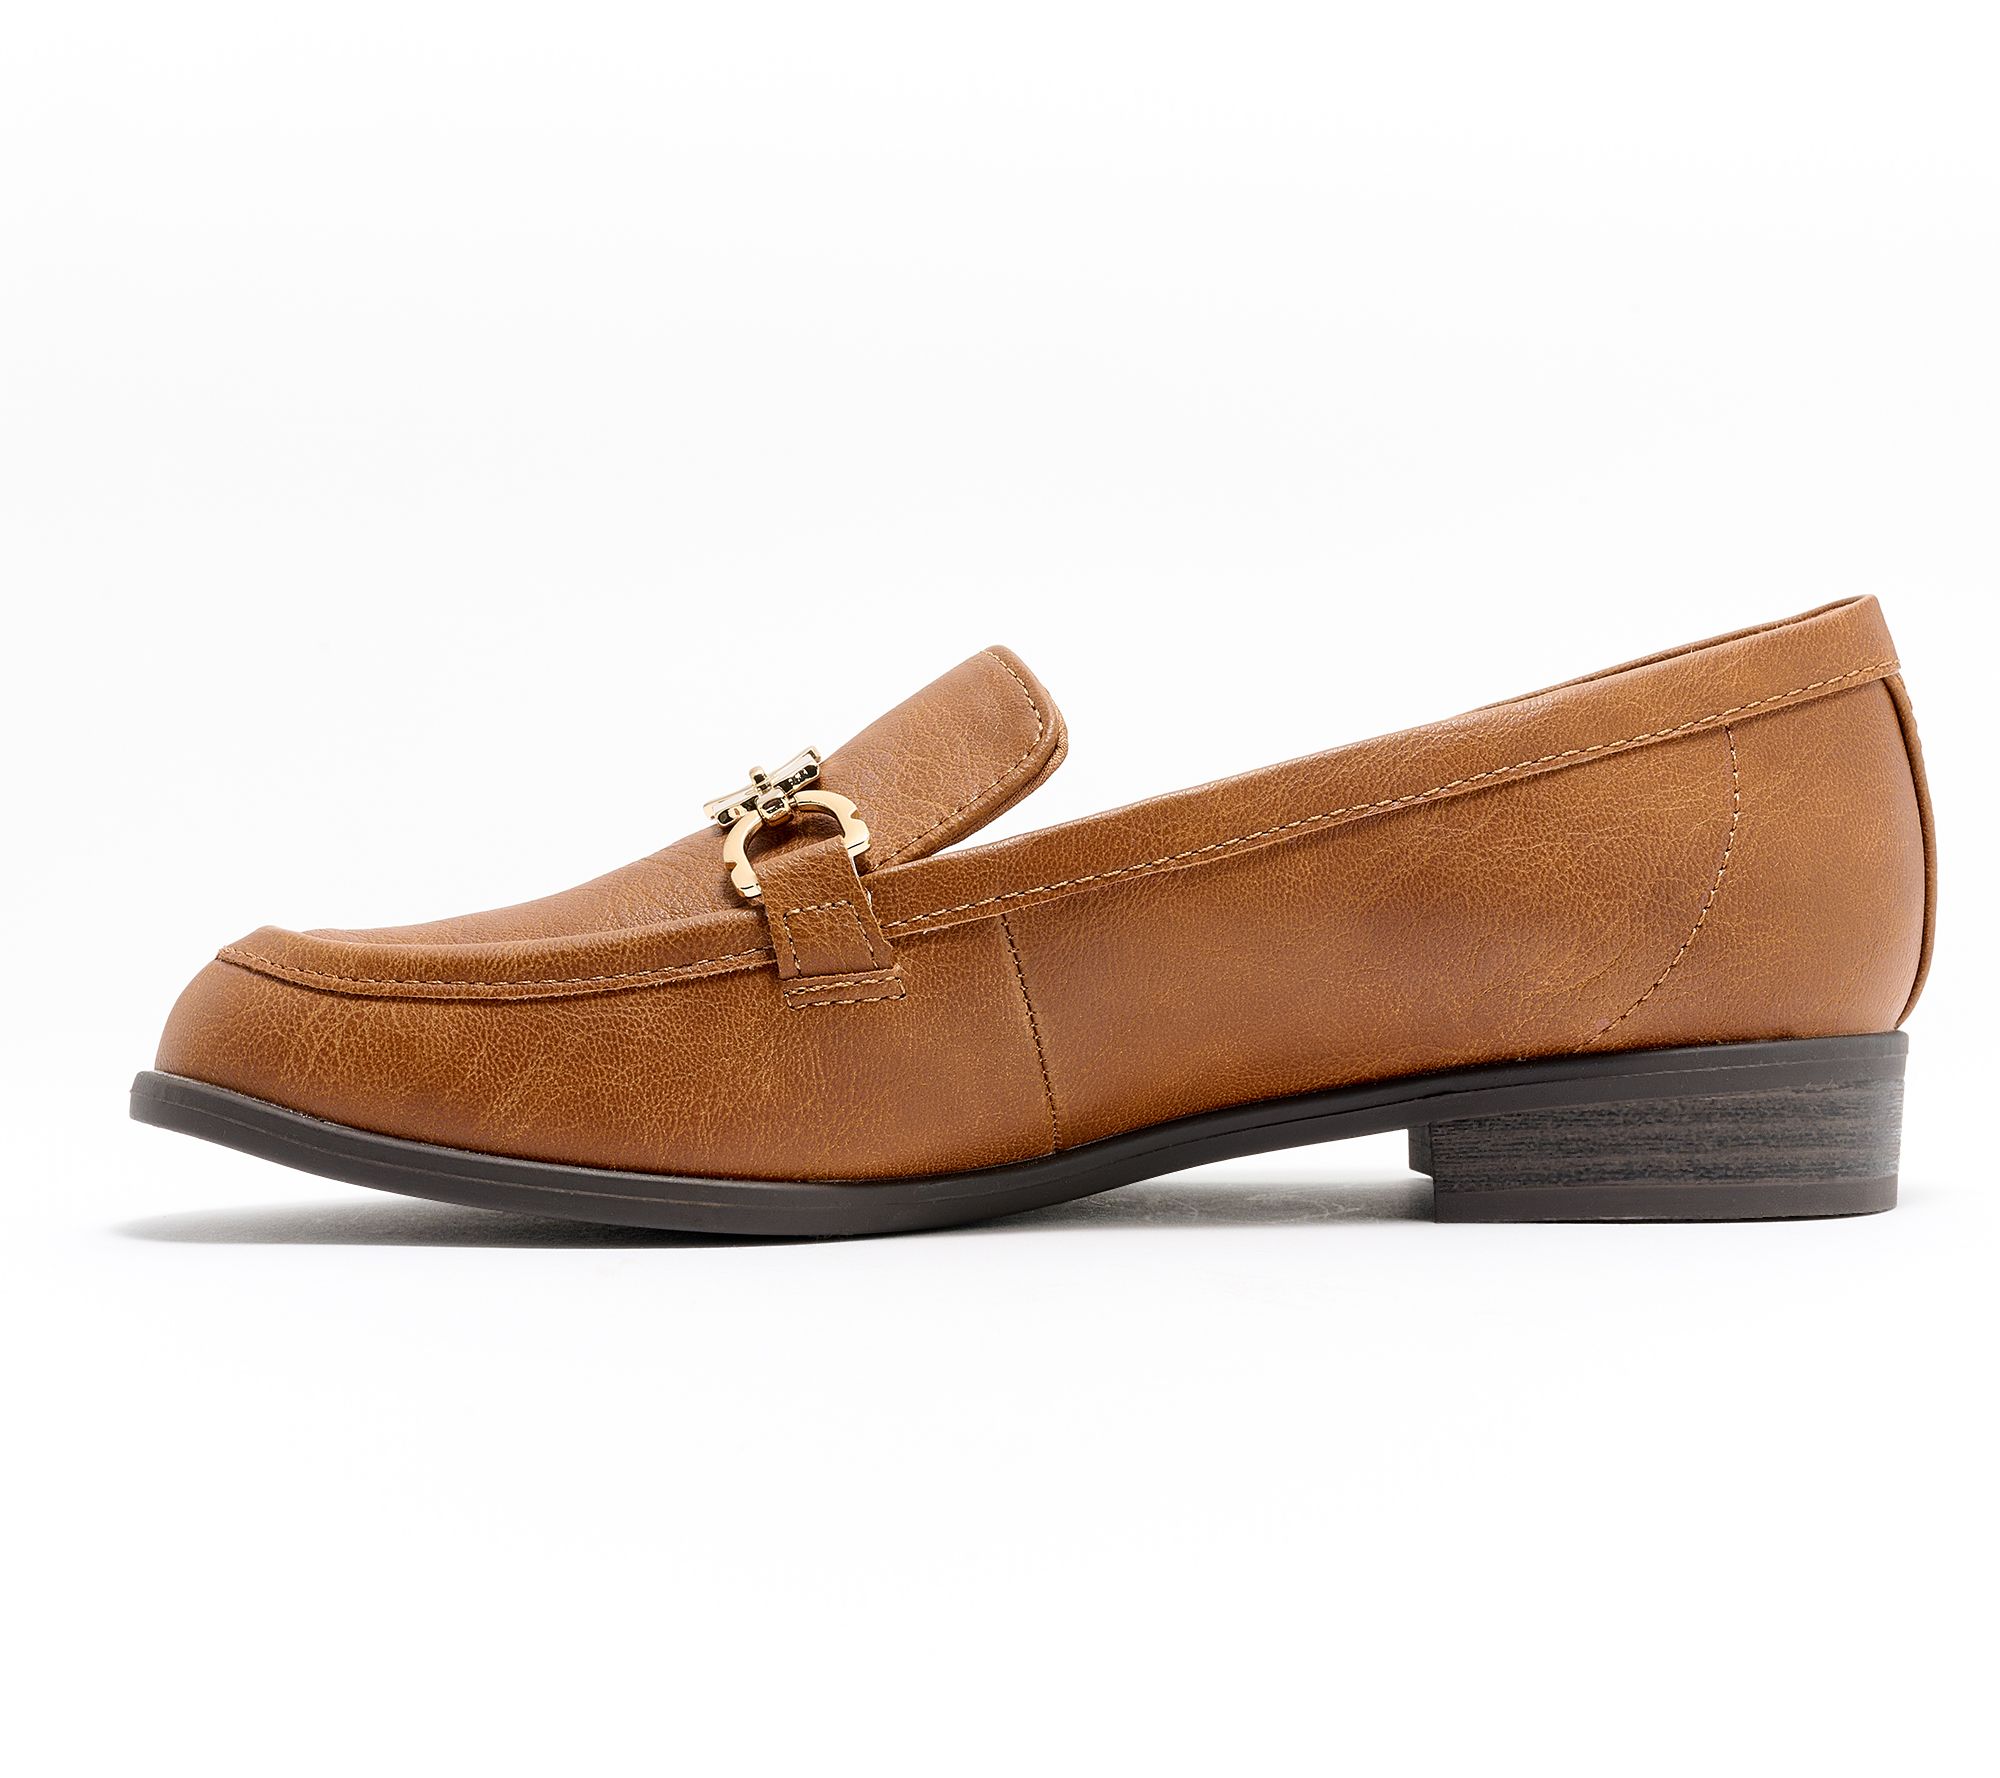 Dr. Scholl's Slip-On Loafers- Rate Adorn - QVC.com